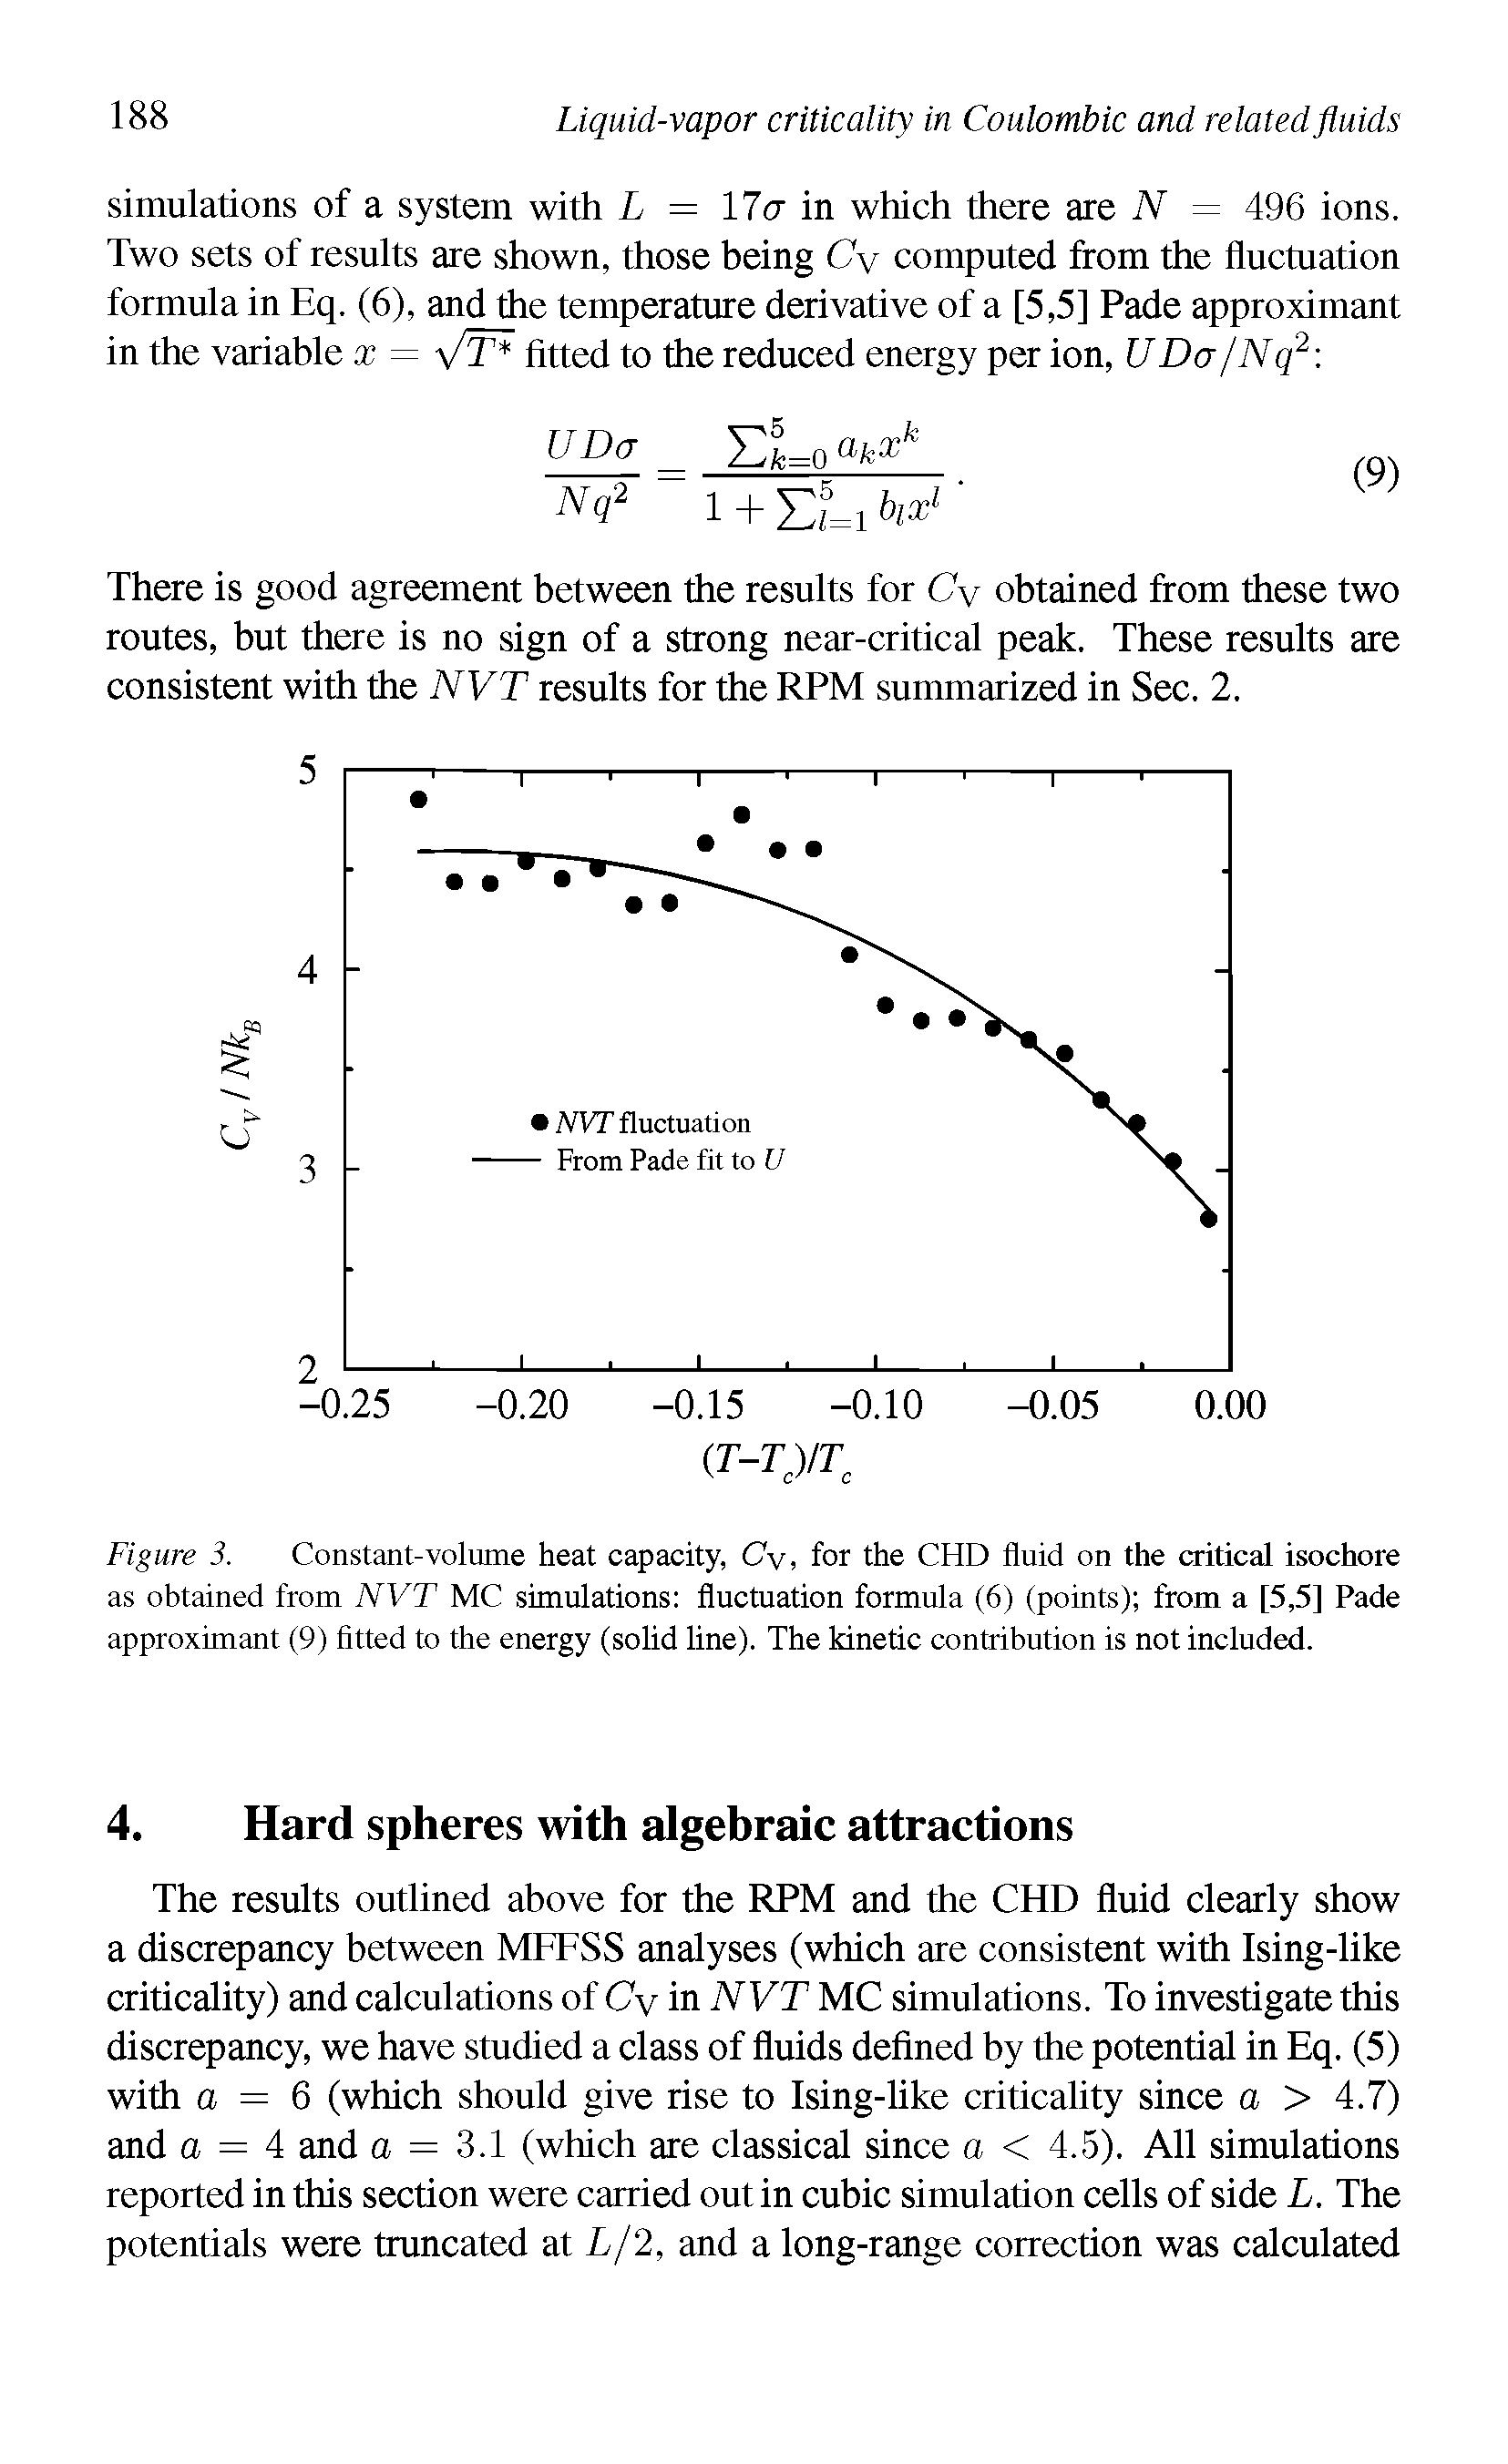 Figure 3. Constant-volume heat capacity, Cy, for the CHD fluid on the critical isochore as obtained from NVT MC simulations fluctuation formula (6) (points) from a [5,5] Pade approximant (9) fitted to the energy (solid line). The kinetic contribution is not included.